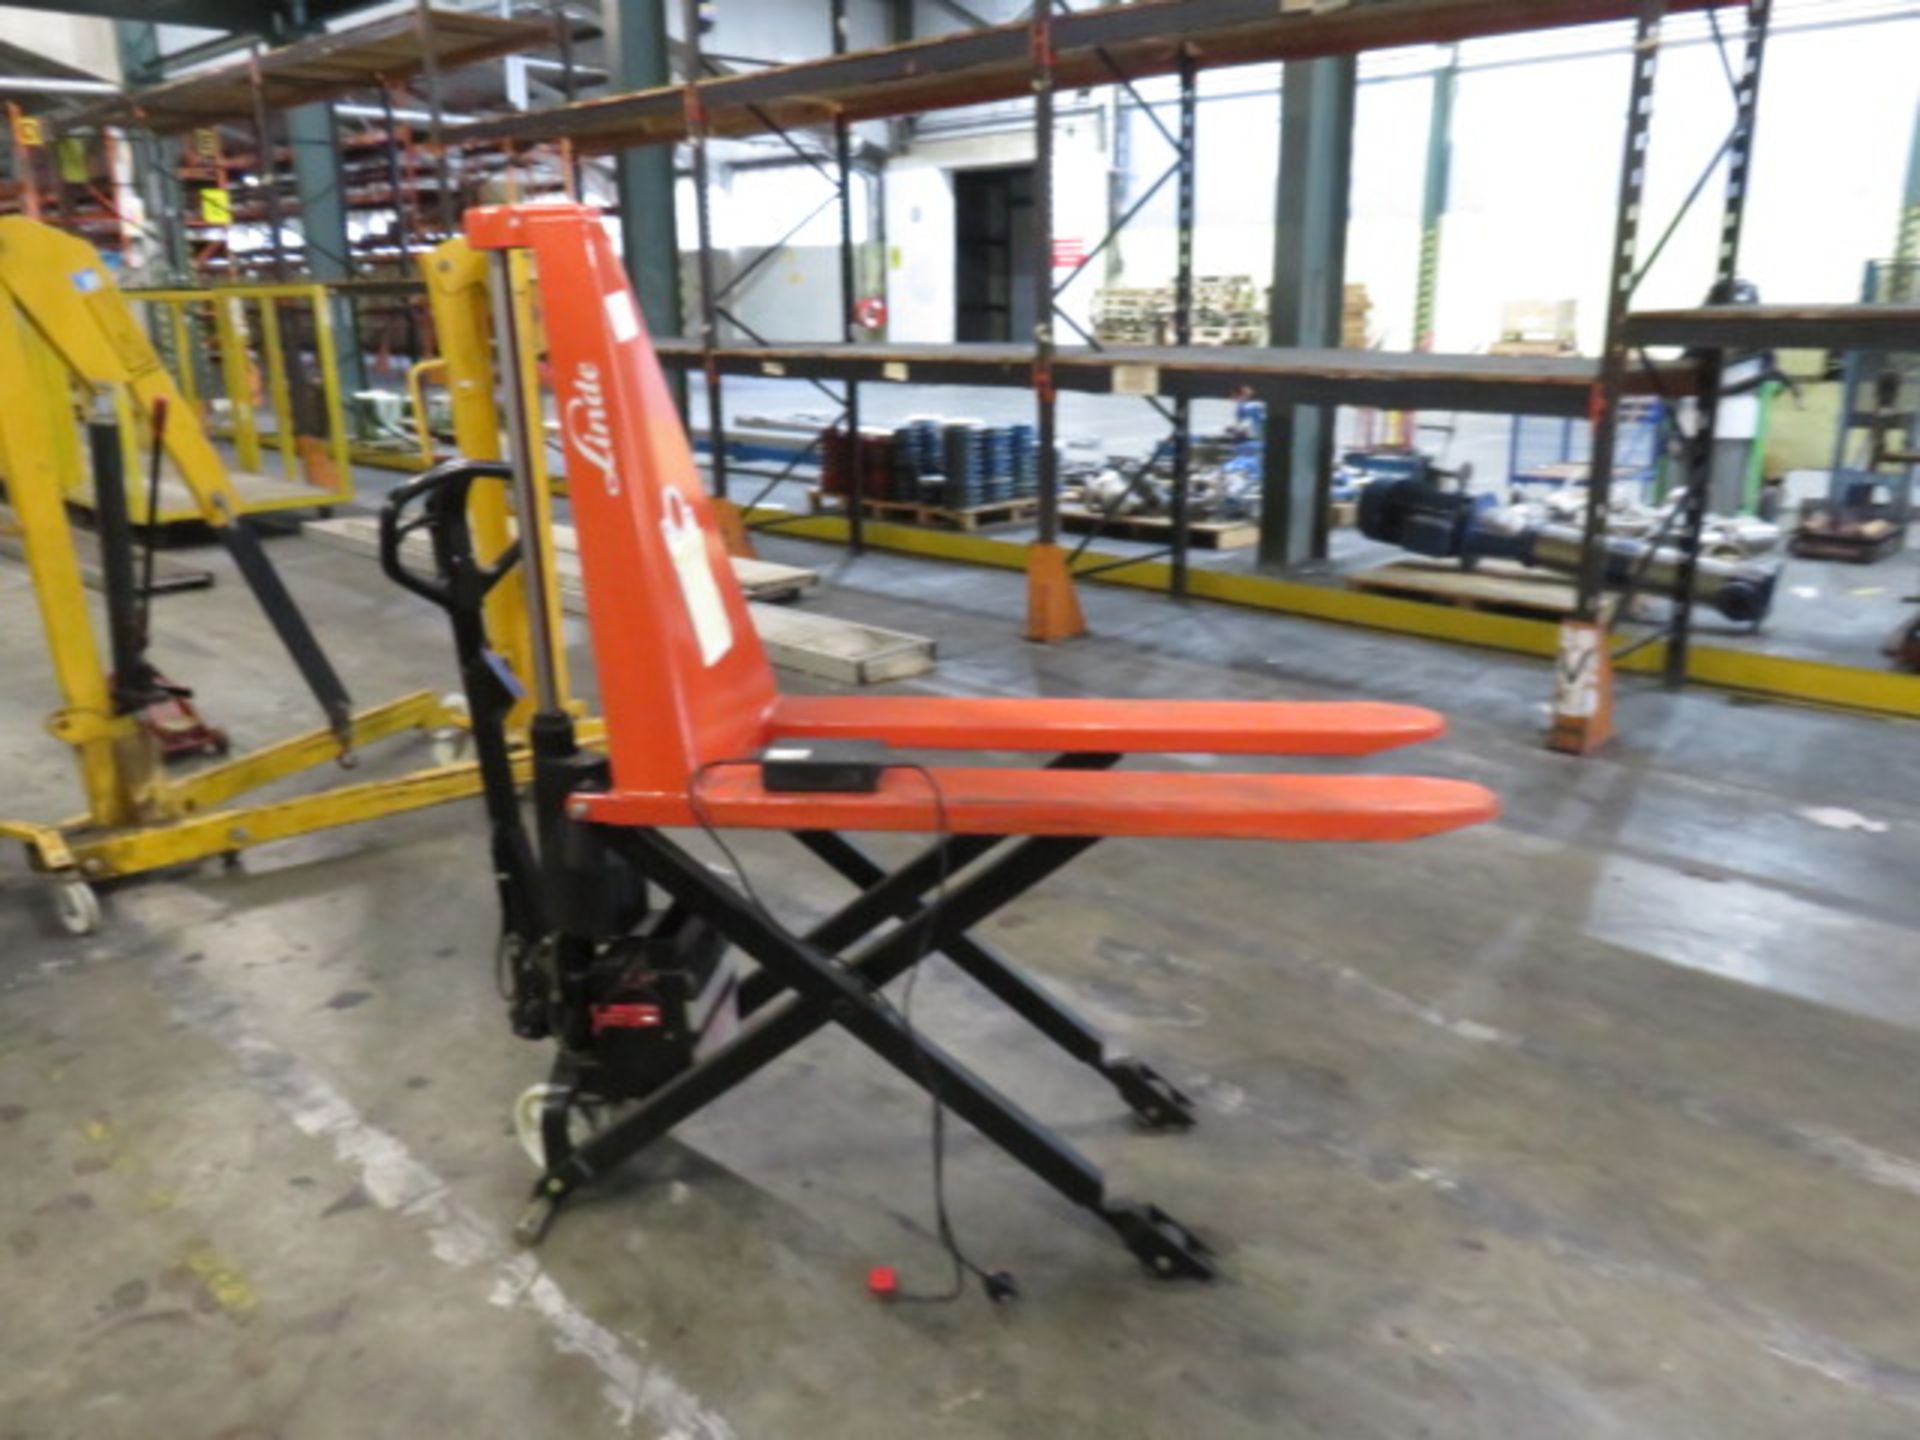 1 Linde ACX 10E Manual and Semi Electric Scissor Lift. Serial No. 10170031 with 1000kg Capacity at 6 - Image 2 of 2